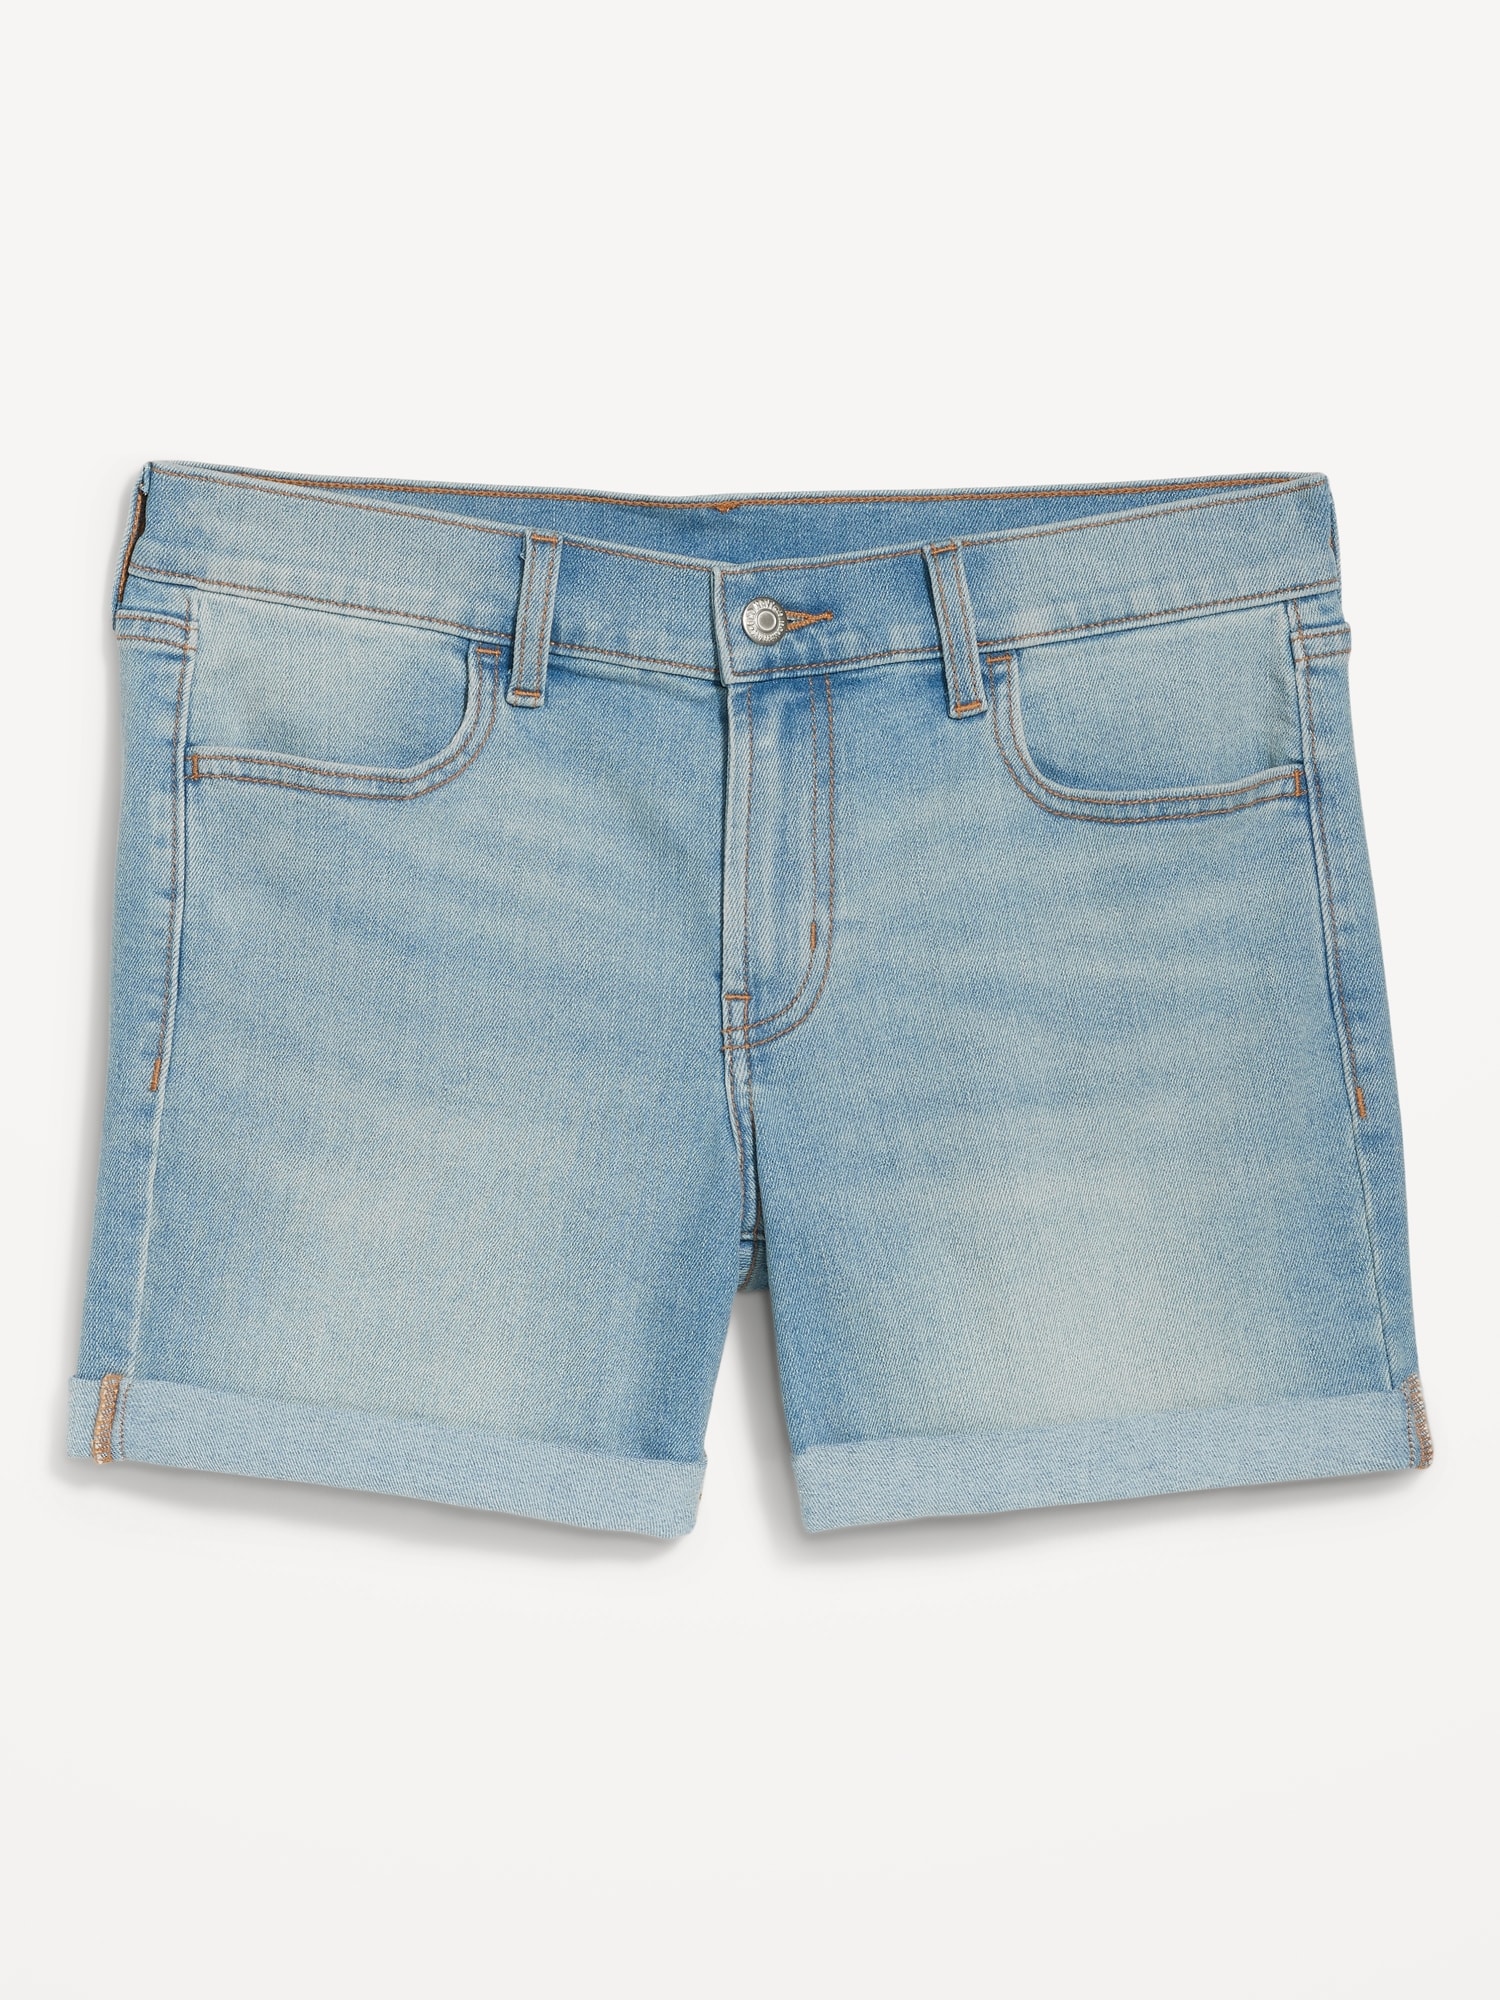 Mid-Rise Wow Jean Shorts -- 5-inch inseam | Old Navy